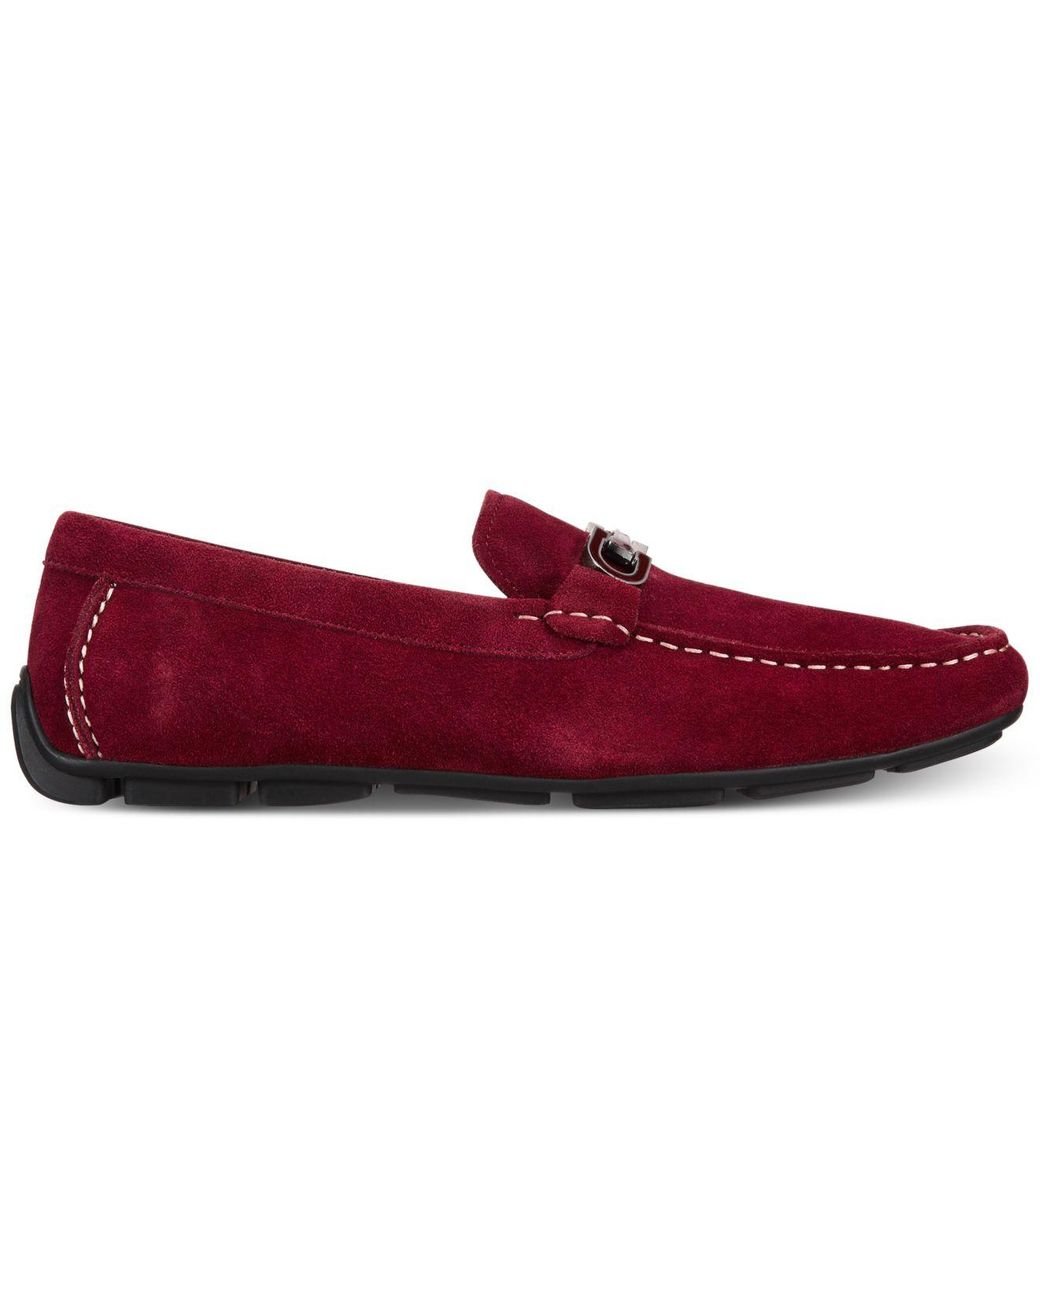 remy casual loafers, OFF 74%,Cheap price!